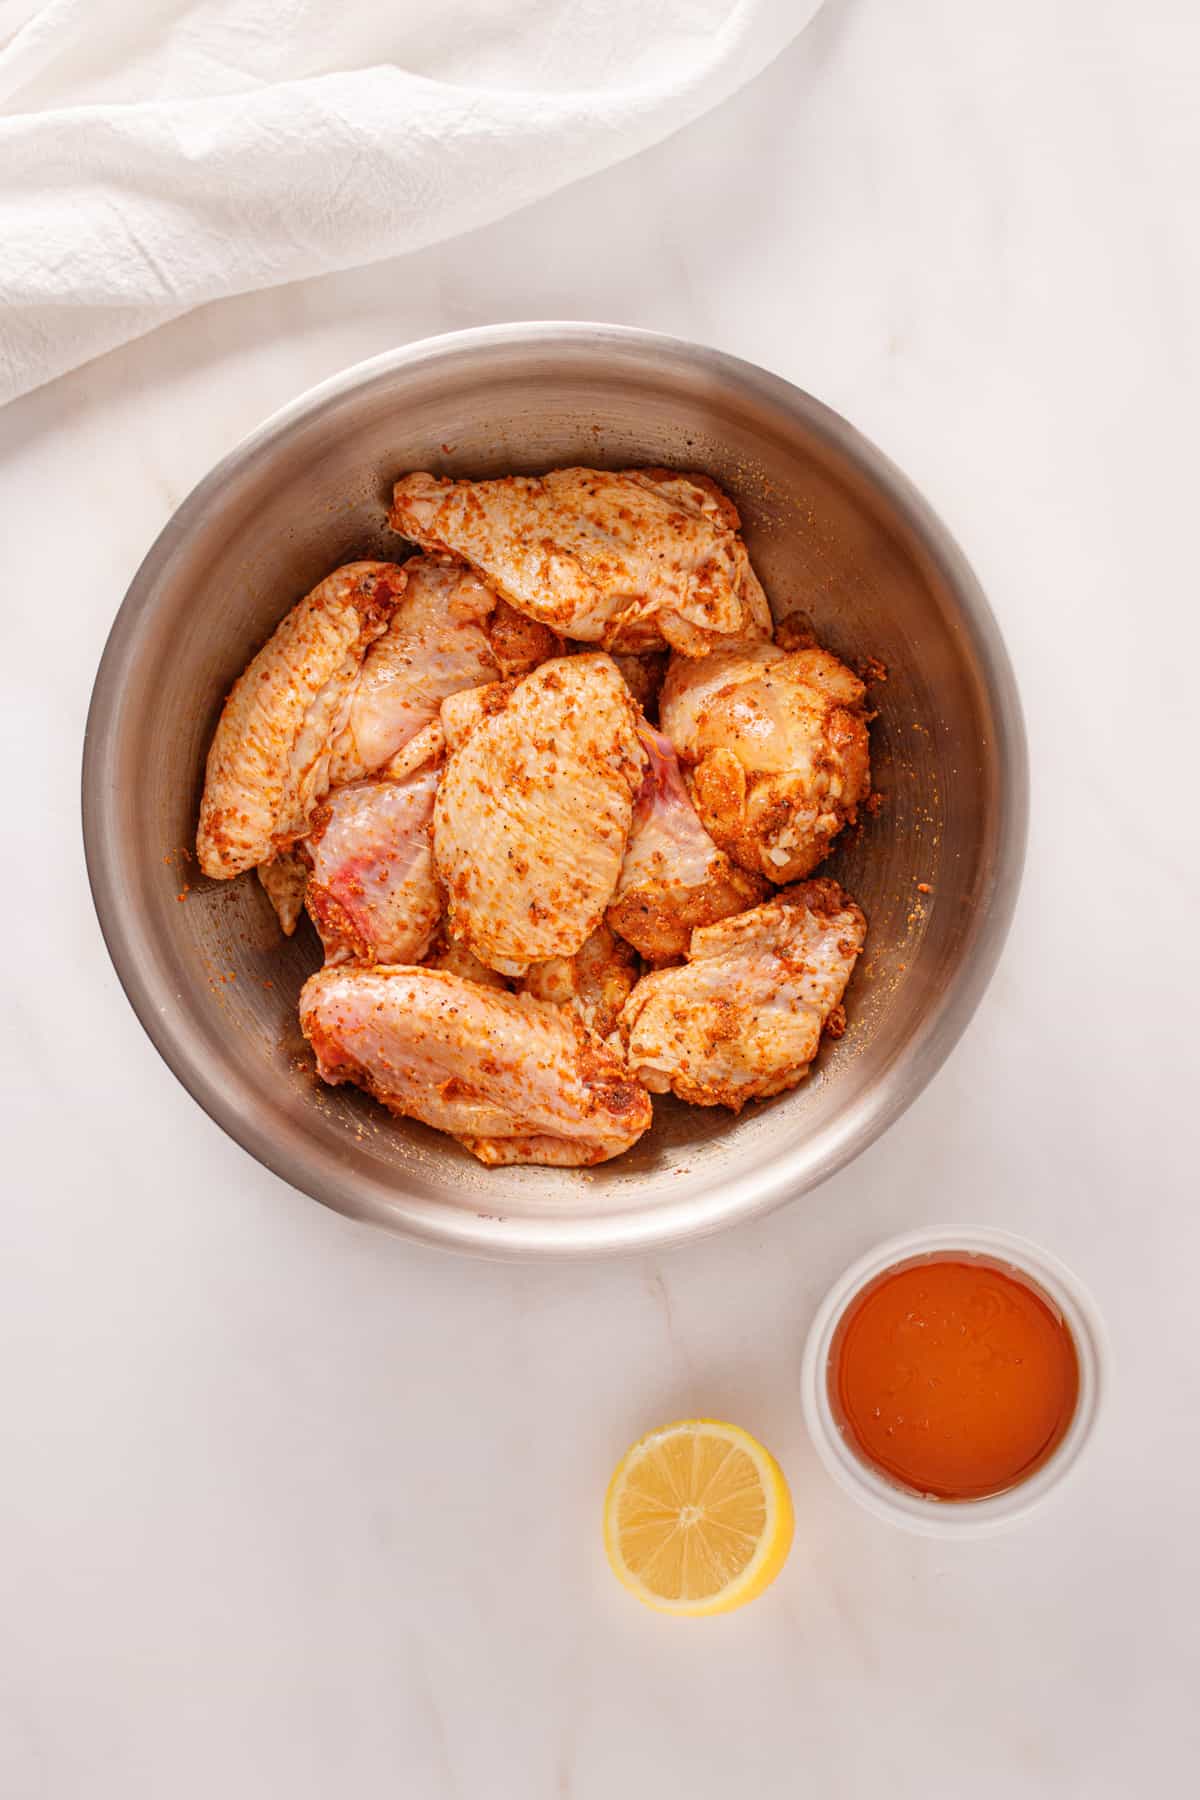 Raw chicken wing pieces in a bowl mixed with spices.